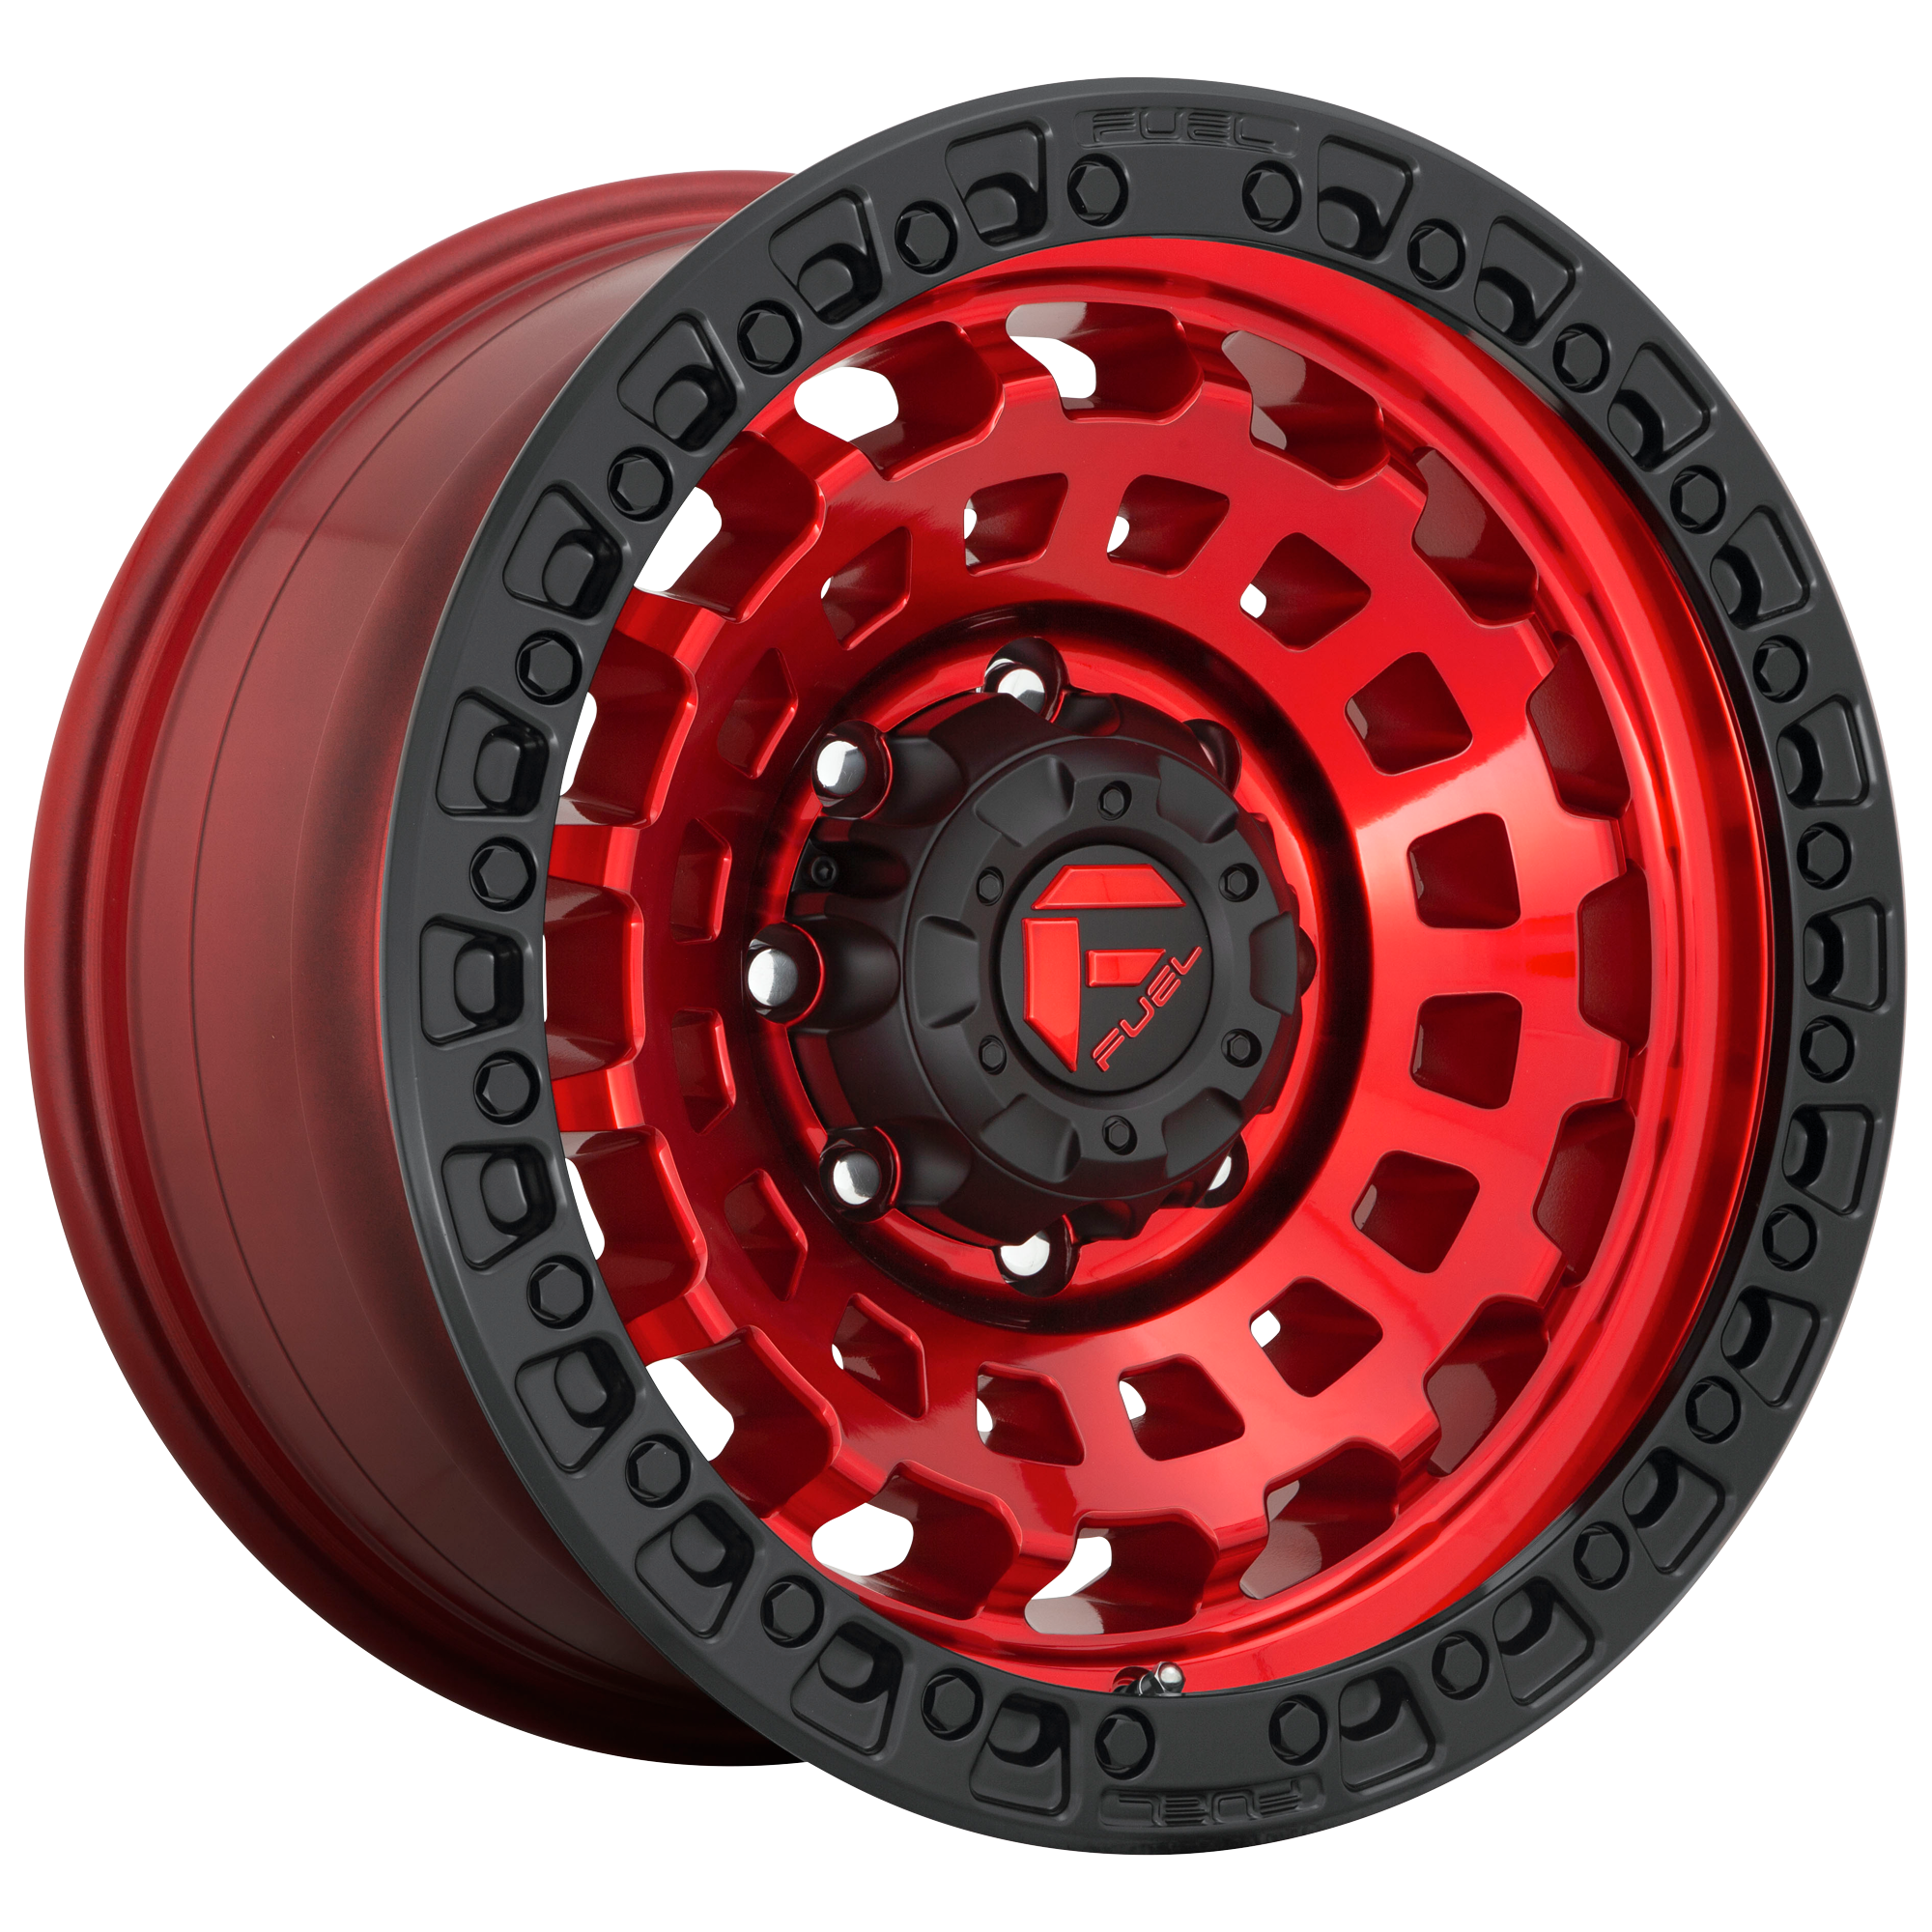 ZEPHYR 20x9 6x139.70 CANDY RED BLACK BEAD RING (1 mm) - Tires and Engine Performance